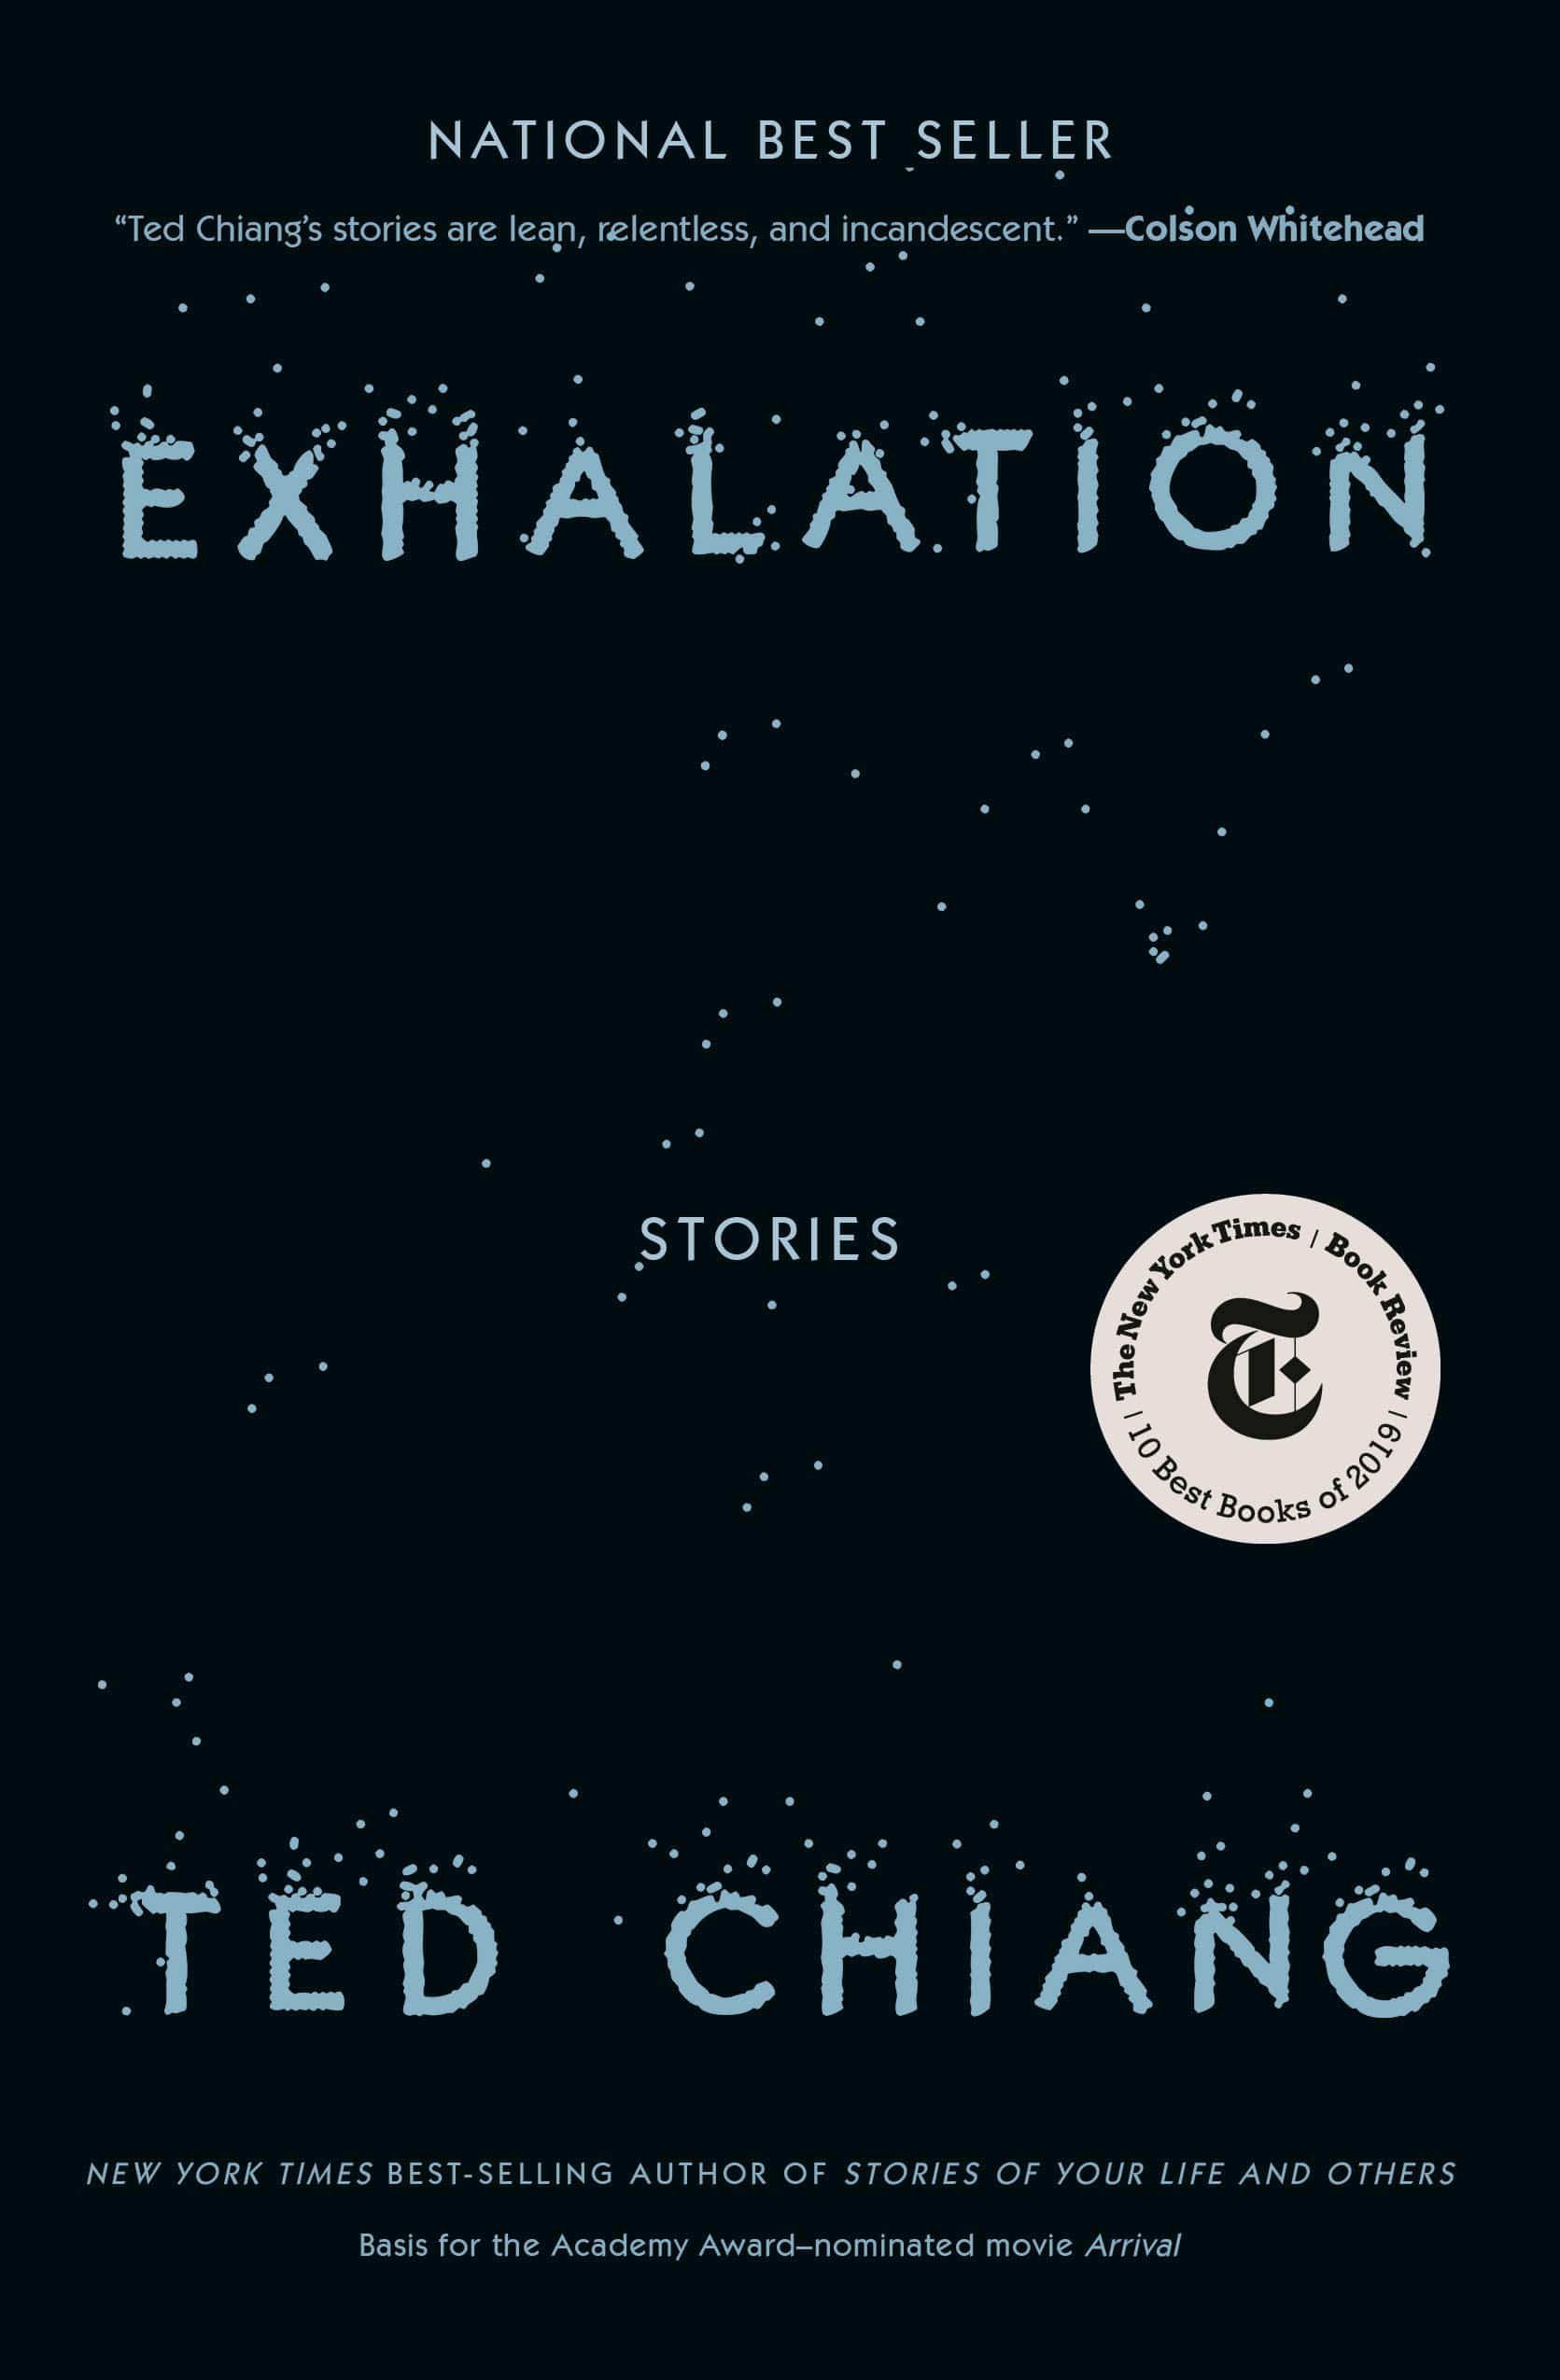 The cover of Exhalation